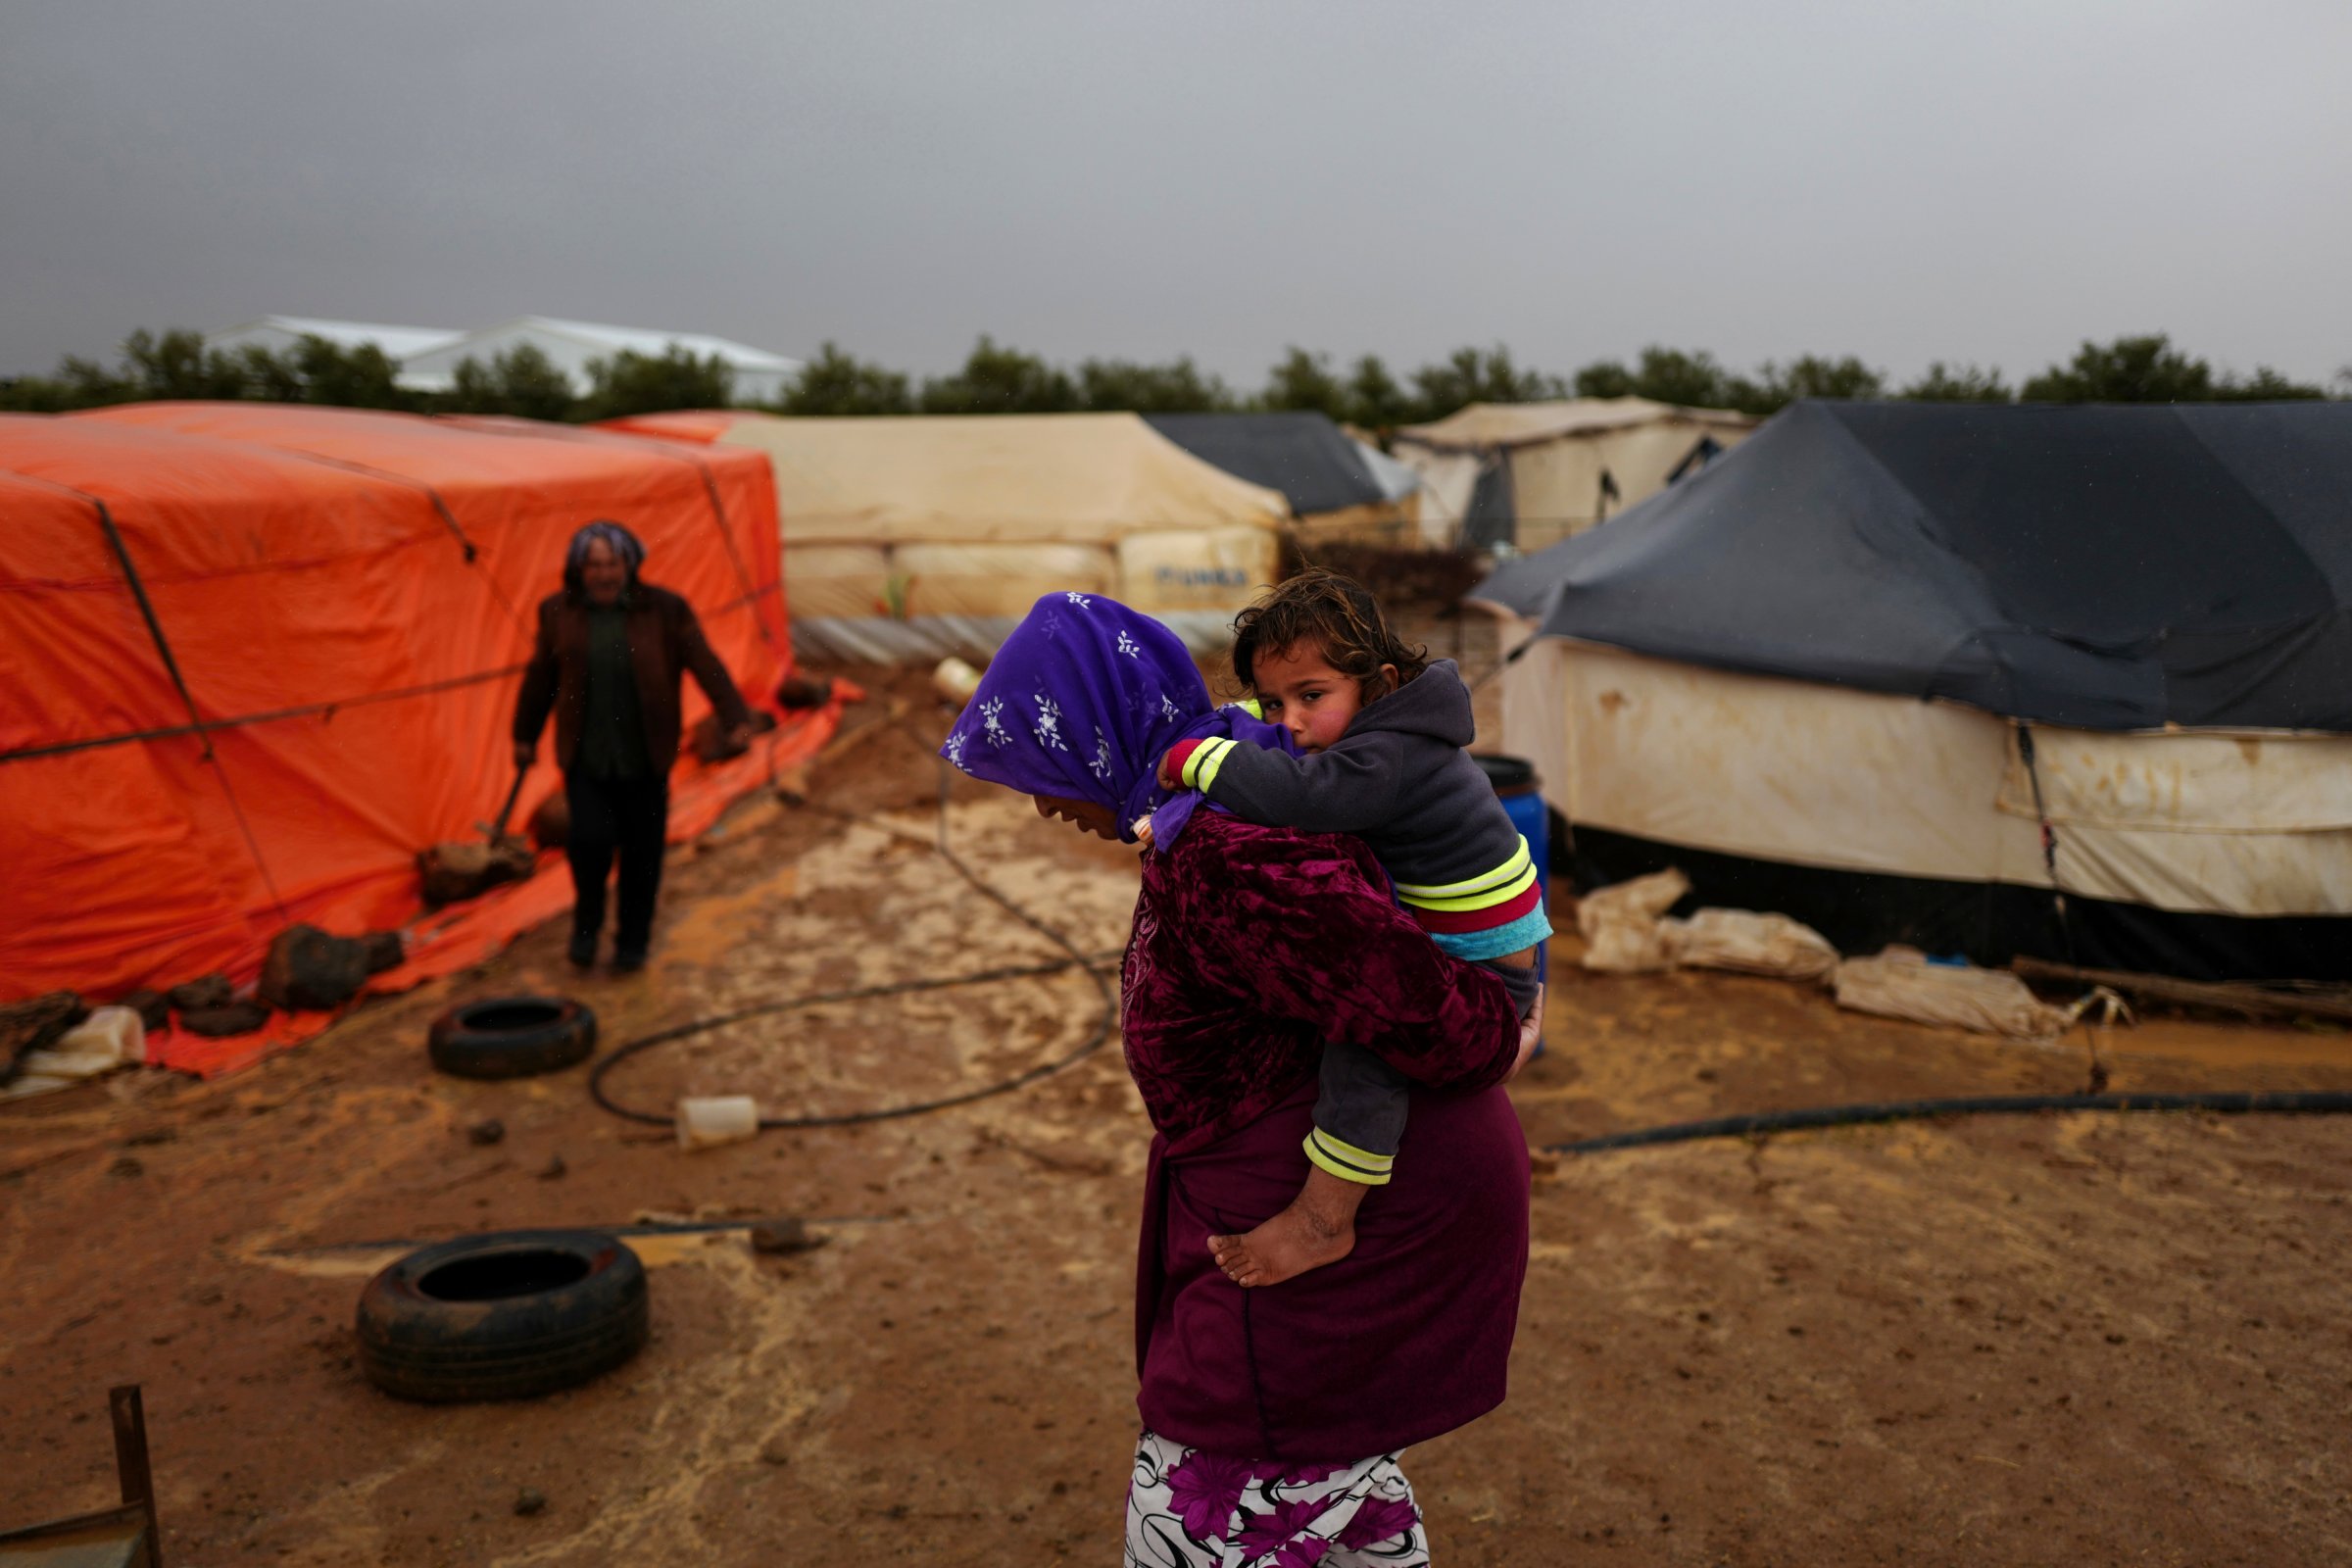 A Syrian refugee carries her child as she heads back to her tent through muddy grounds during a rainfall at an informal tented settlement near the Syrian border, on the outskirts of Mafraq, Jordan, March 28, 2016.